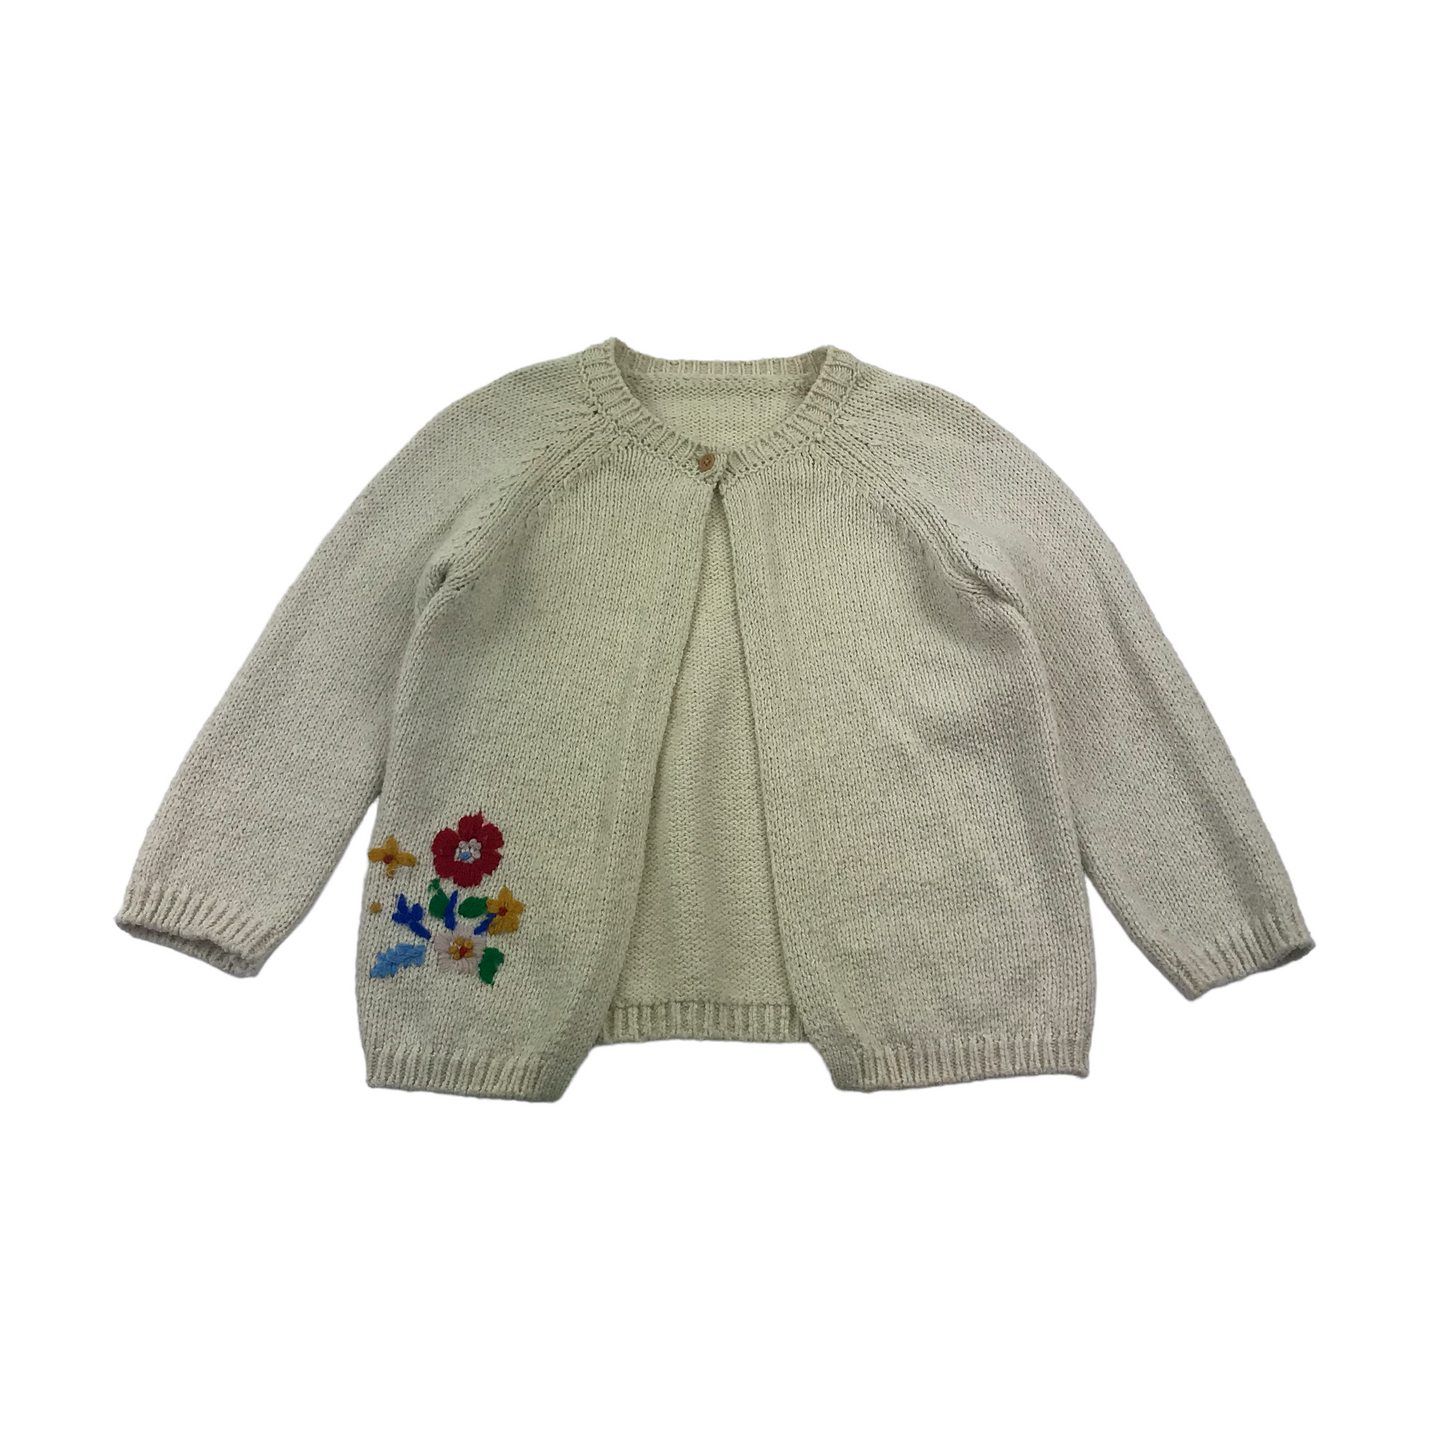 Nutmeg White Floral Embroidery Cardigan Age 4